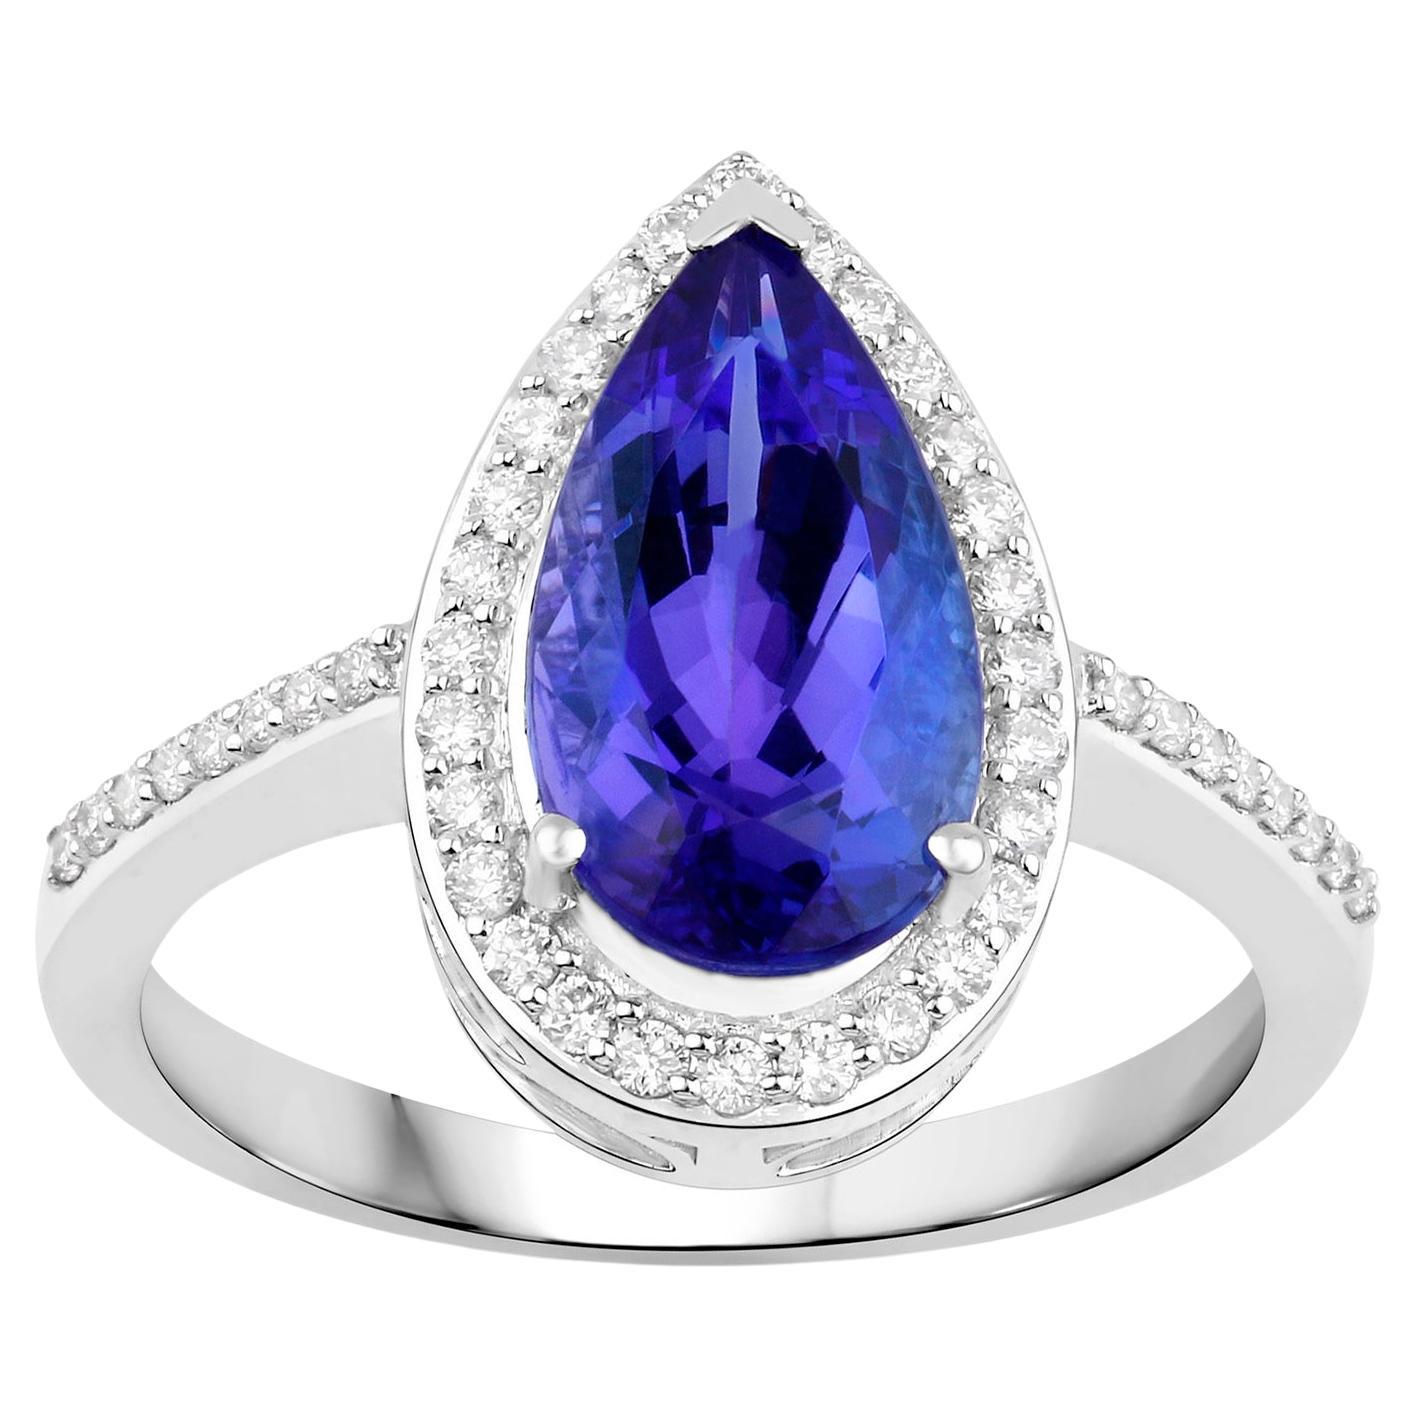 Tanzanite Ring With Diamonds 2.97 Carats 14K White Gold For Sale